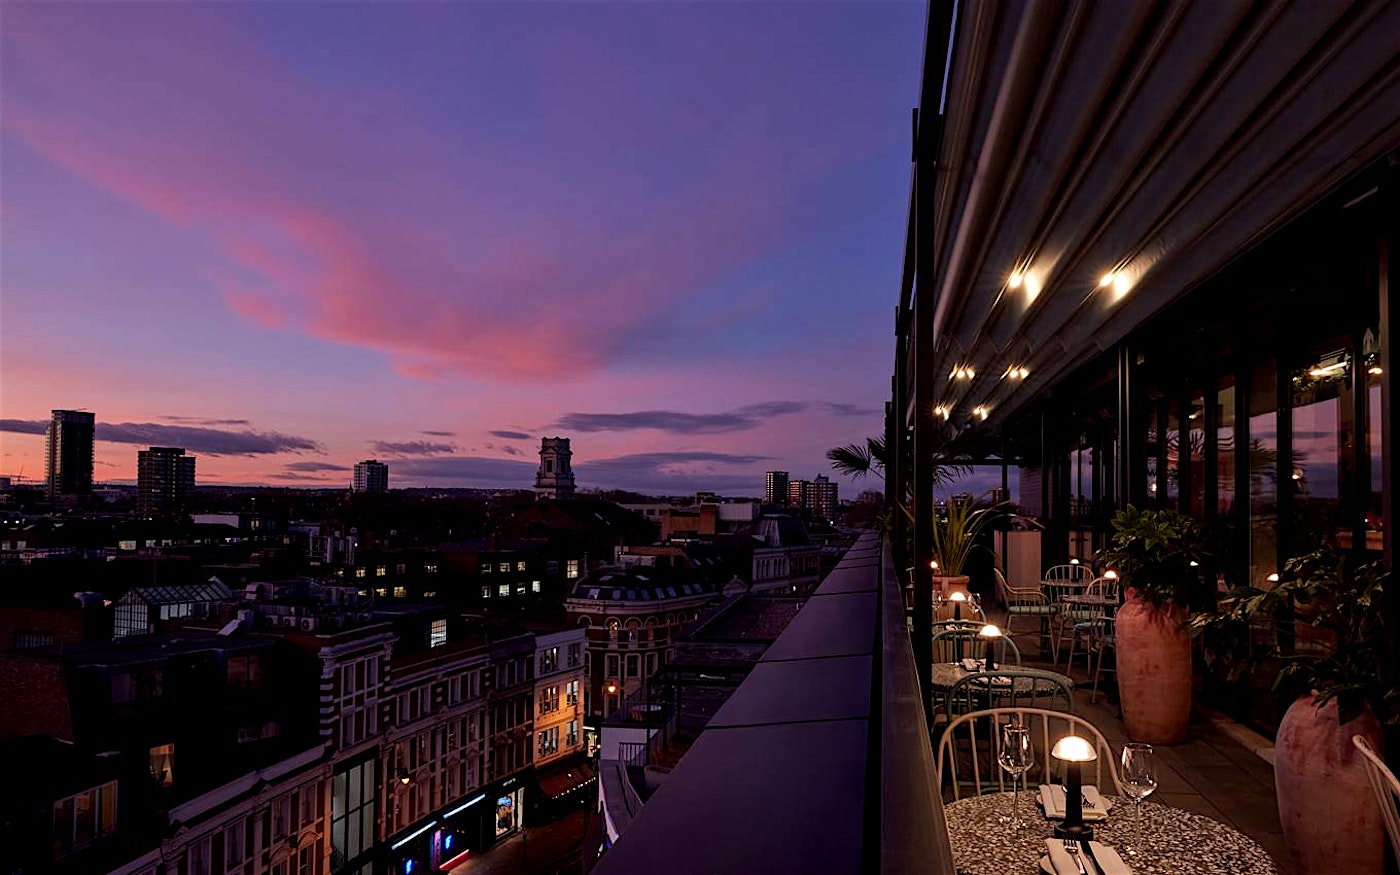 Sunset from the roof terrace at 100 Shoreditch, east London.